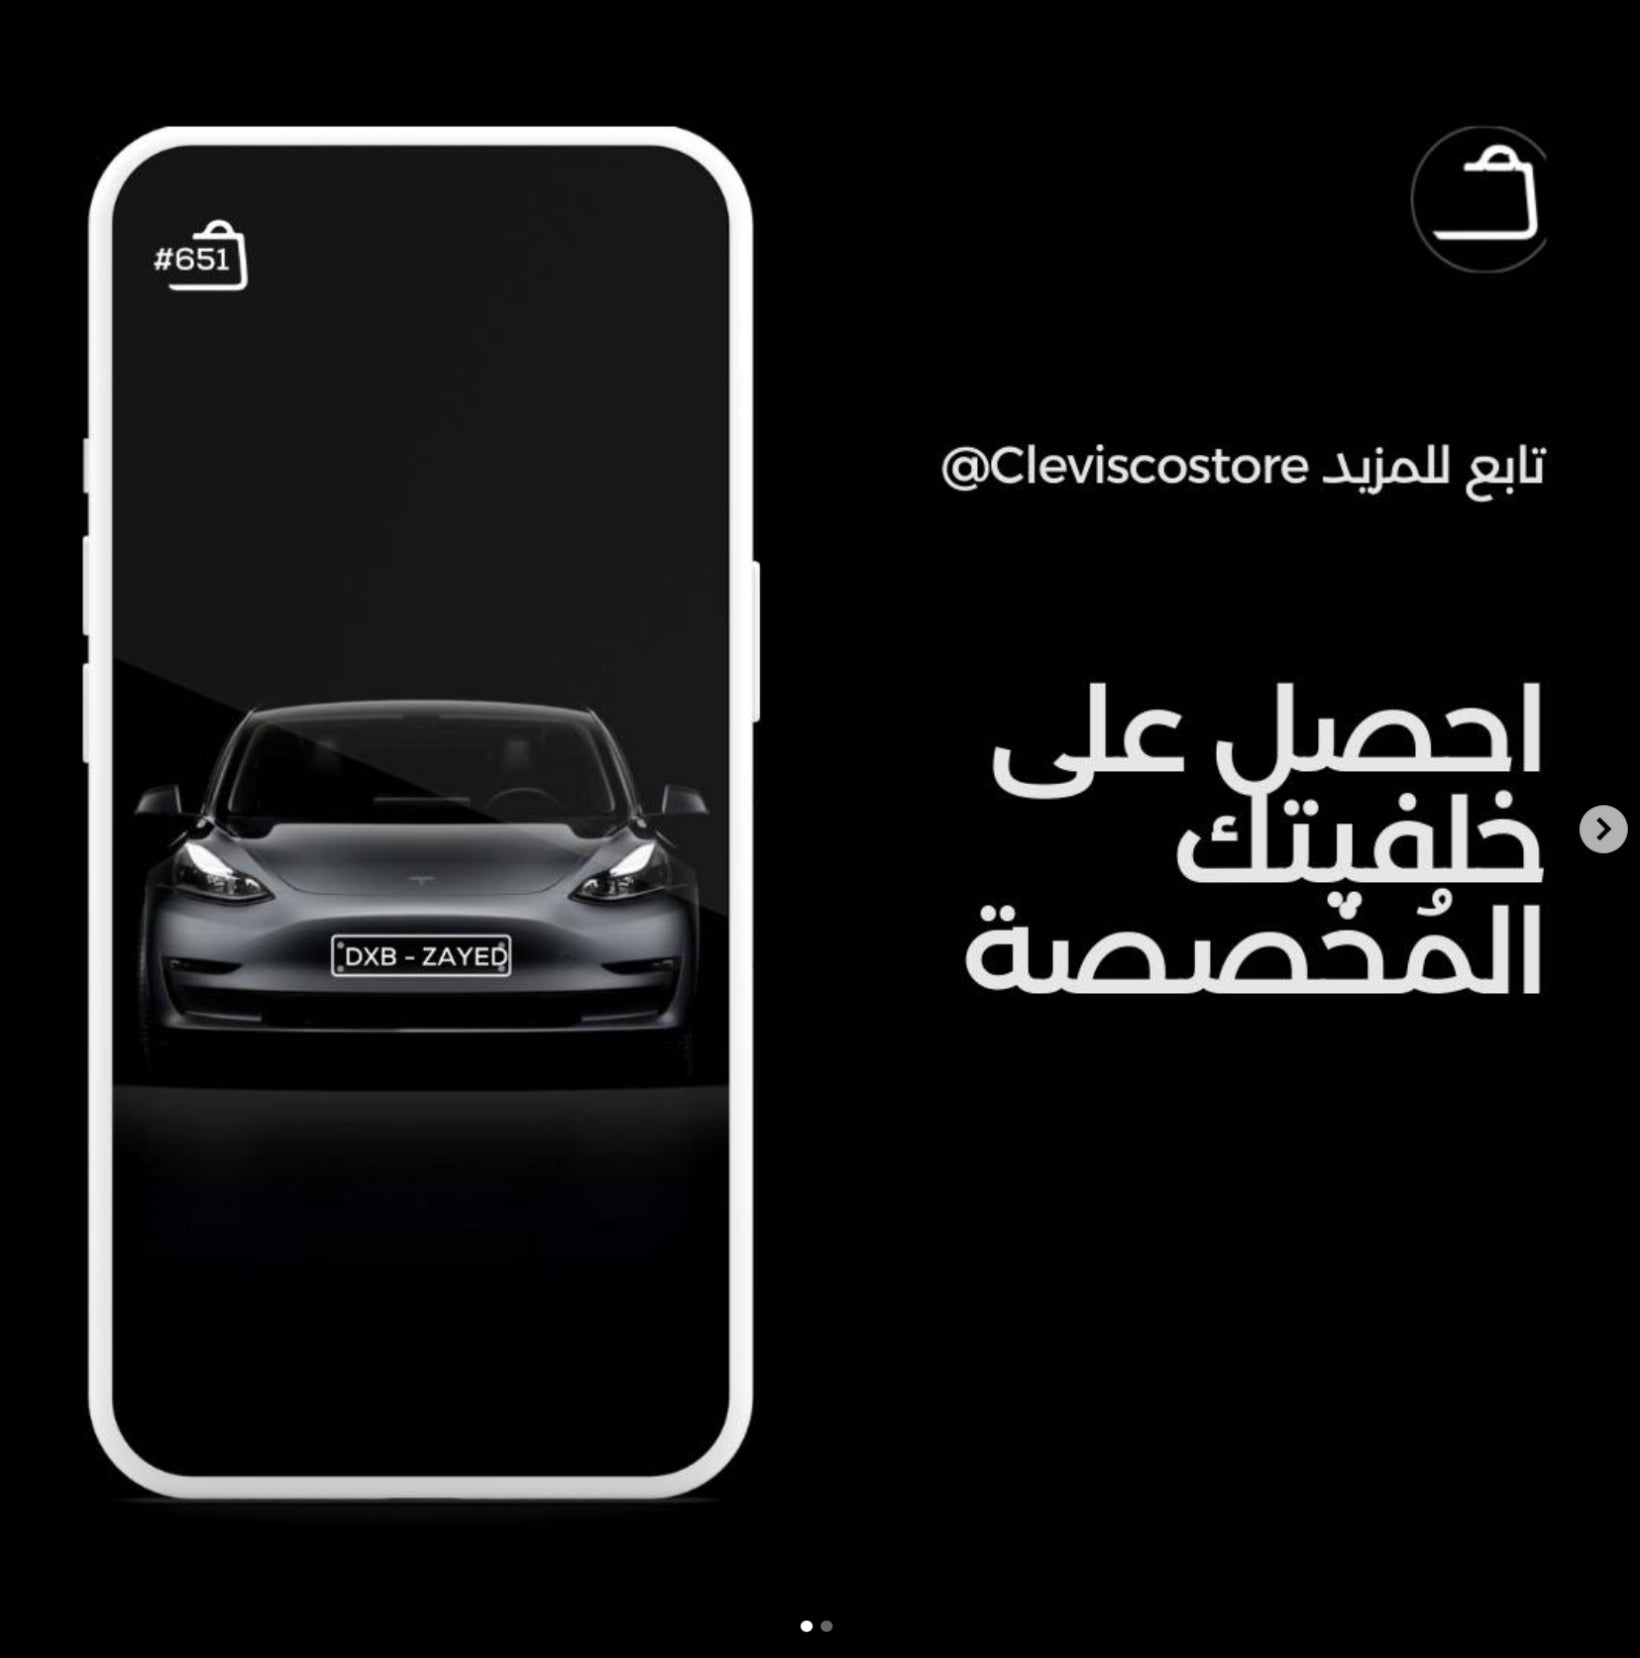 Image showcasing a digital advertisement for a Tesla car, displayed on a smartphone screen with Arabic text and a tag to ‘@Cleviscostore’, set against a dark background, emphasizing a modern and sophisticated aesthetic.